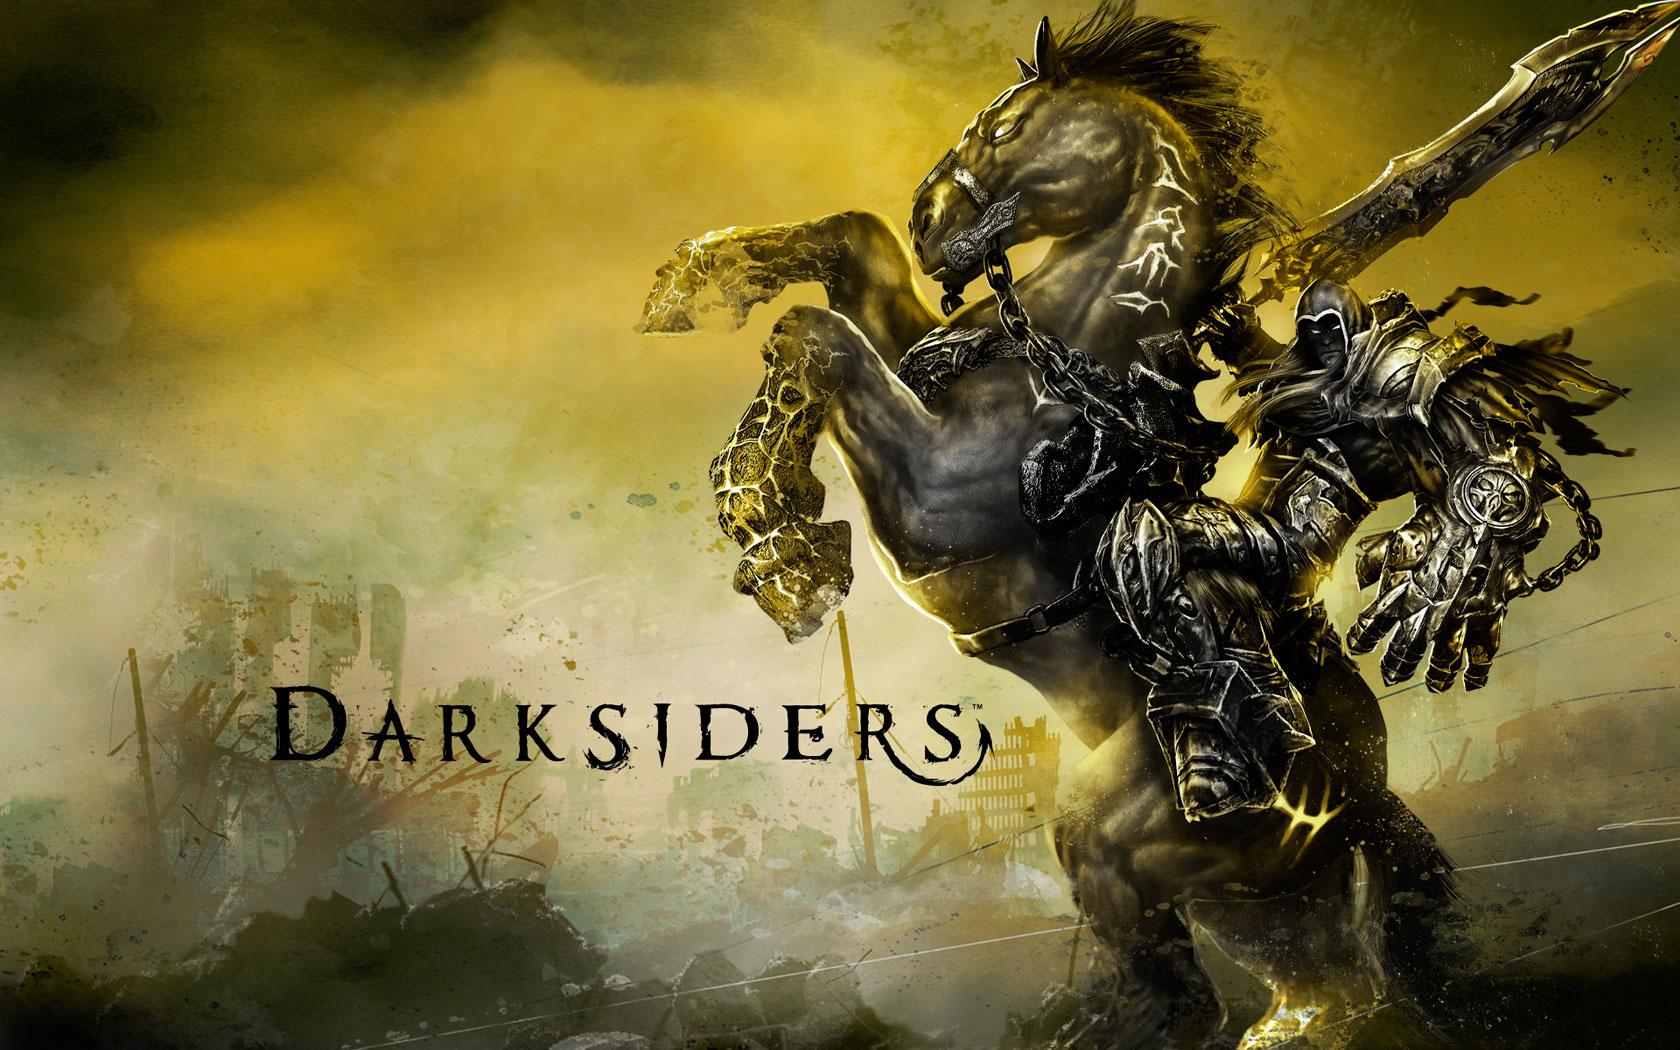 Game Trainers: Darksiders: Warmastered v20170308 +11 Trainer